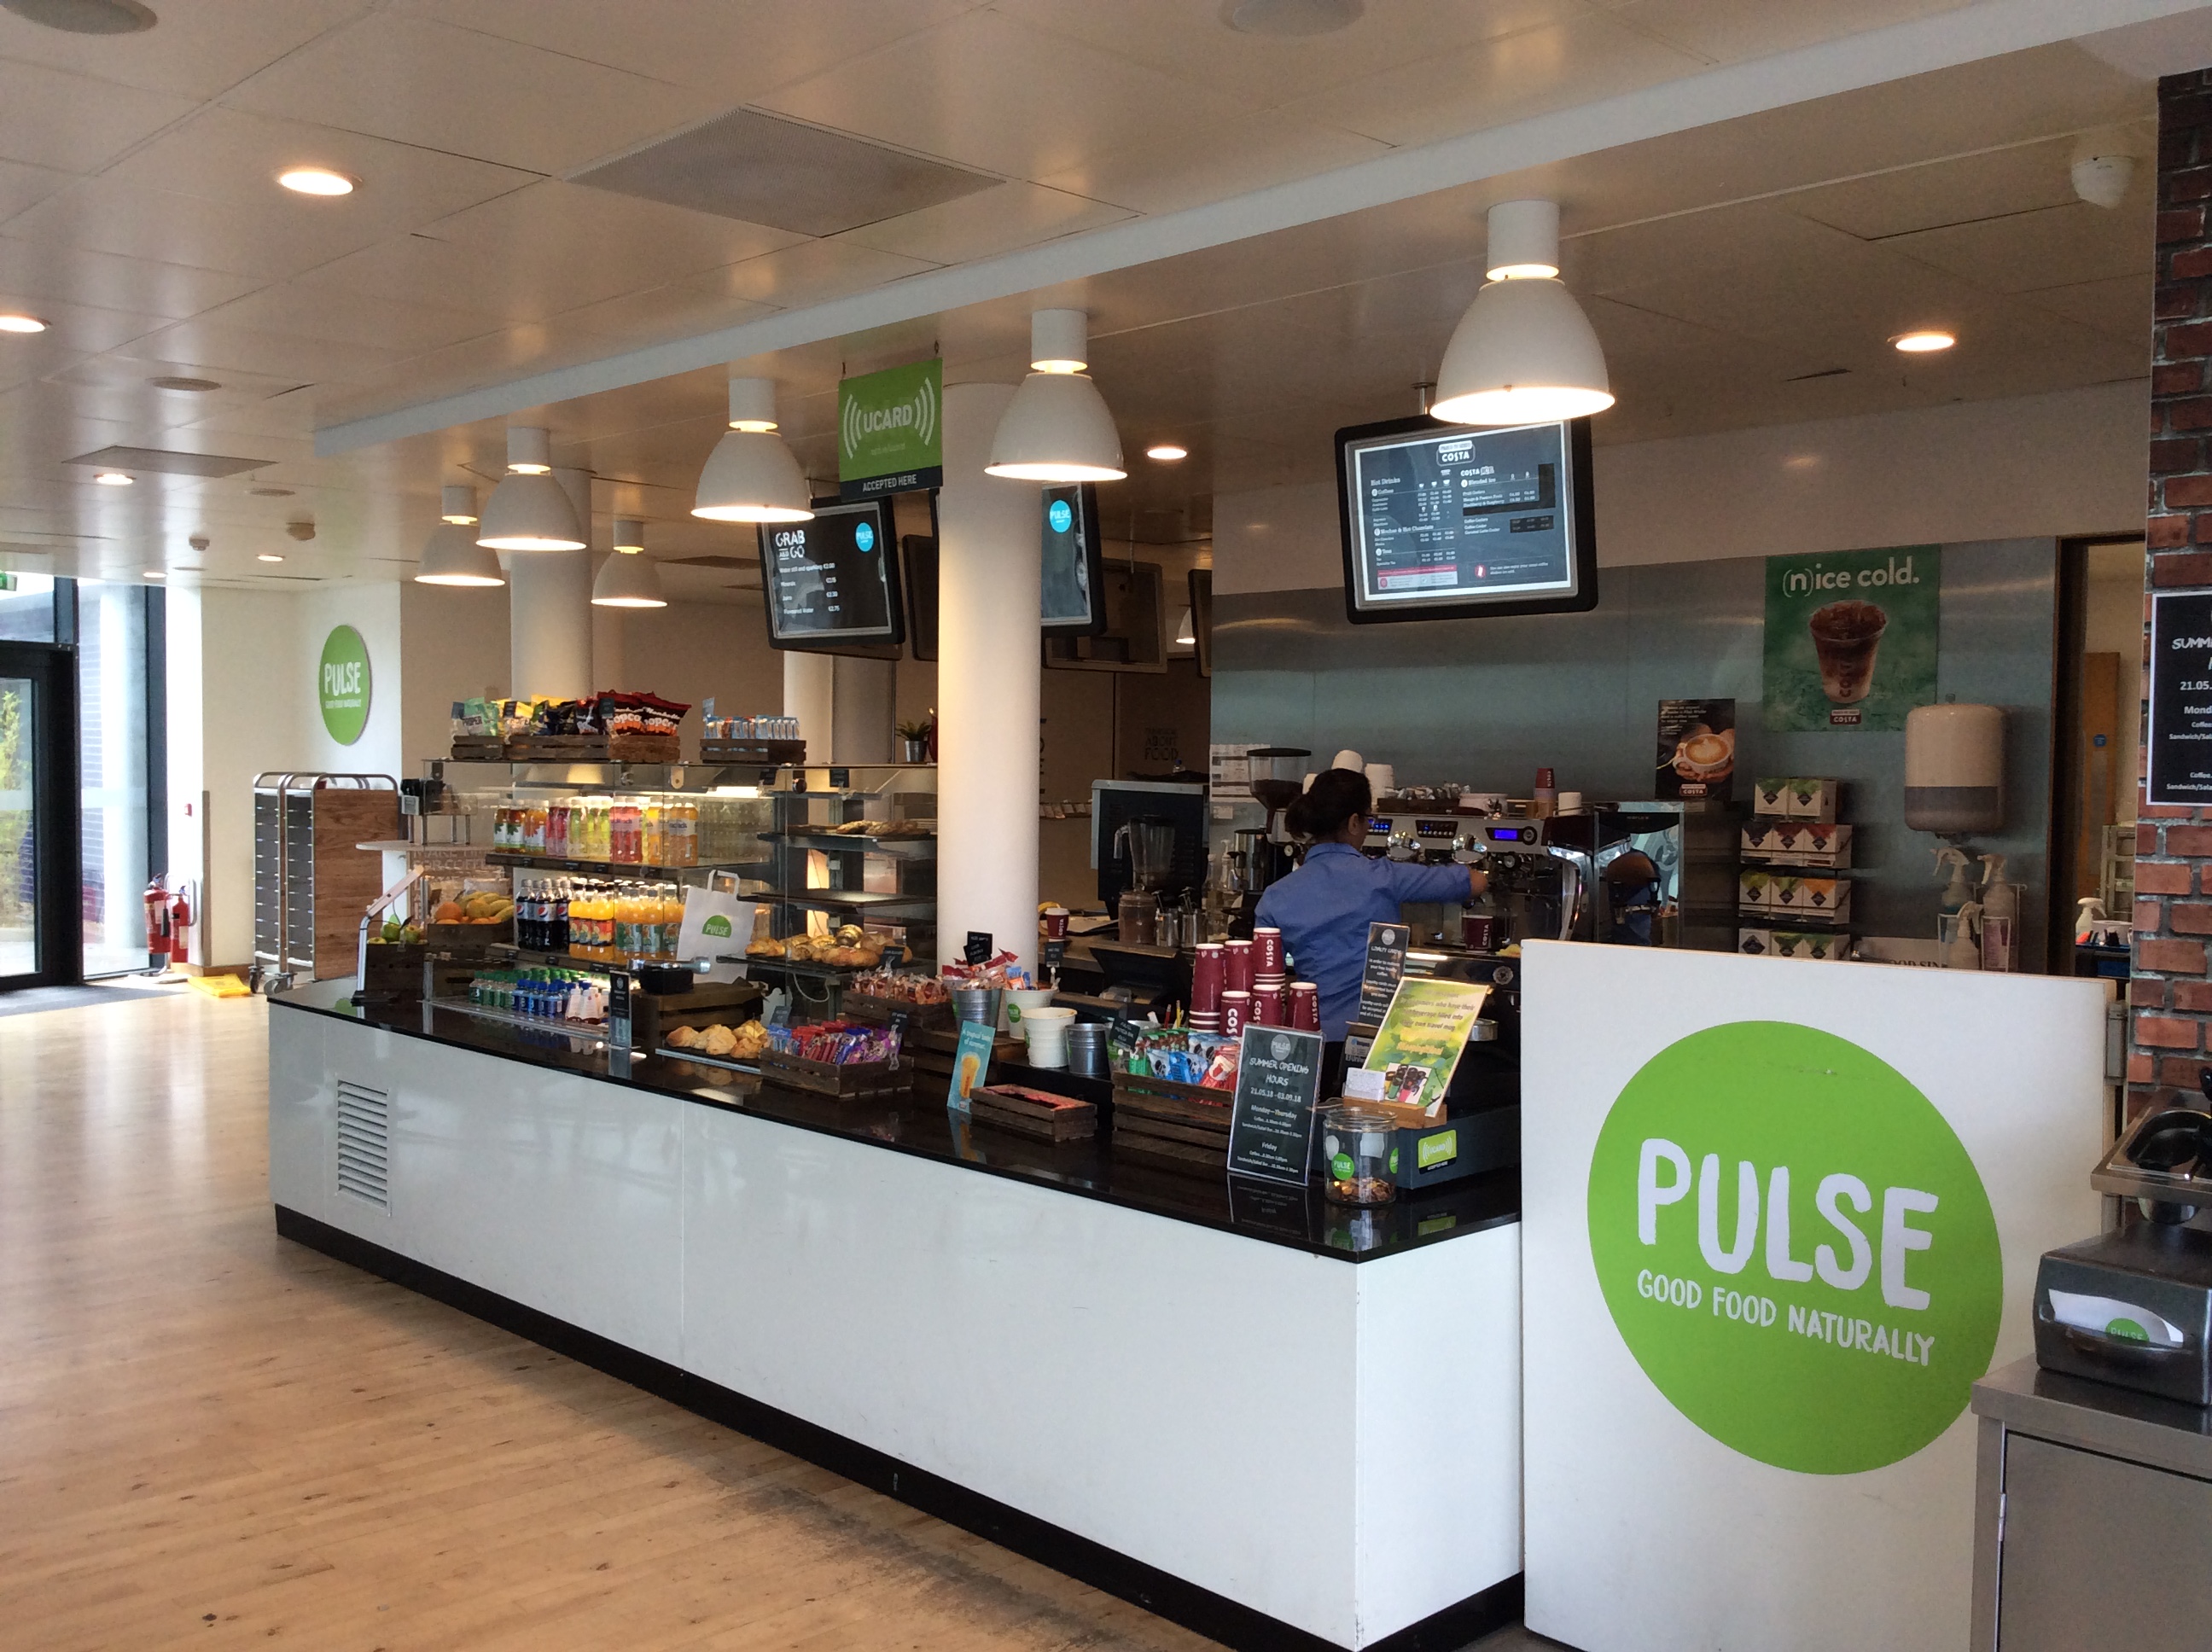 Pulse\n\nSoup and sandwiches freshly made, coffee, teas and treats. Dine in or take away.